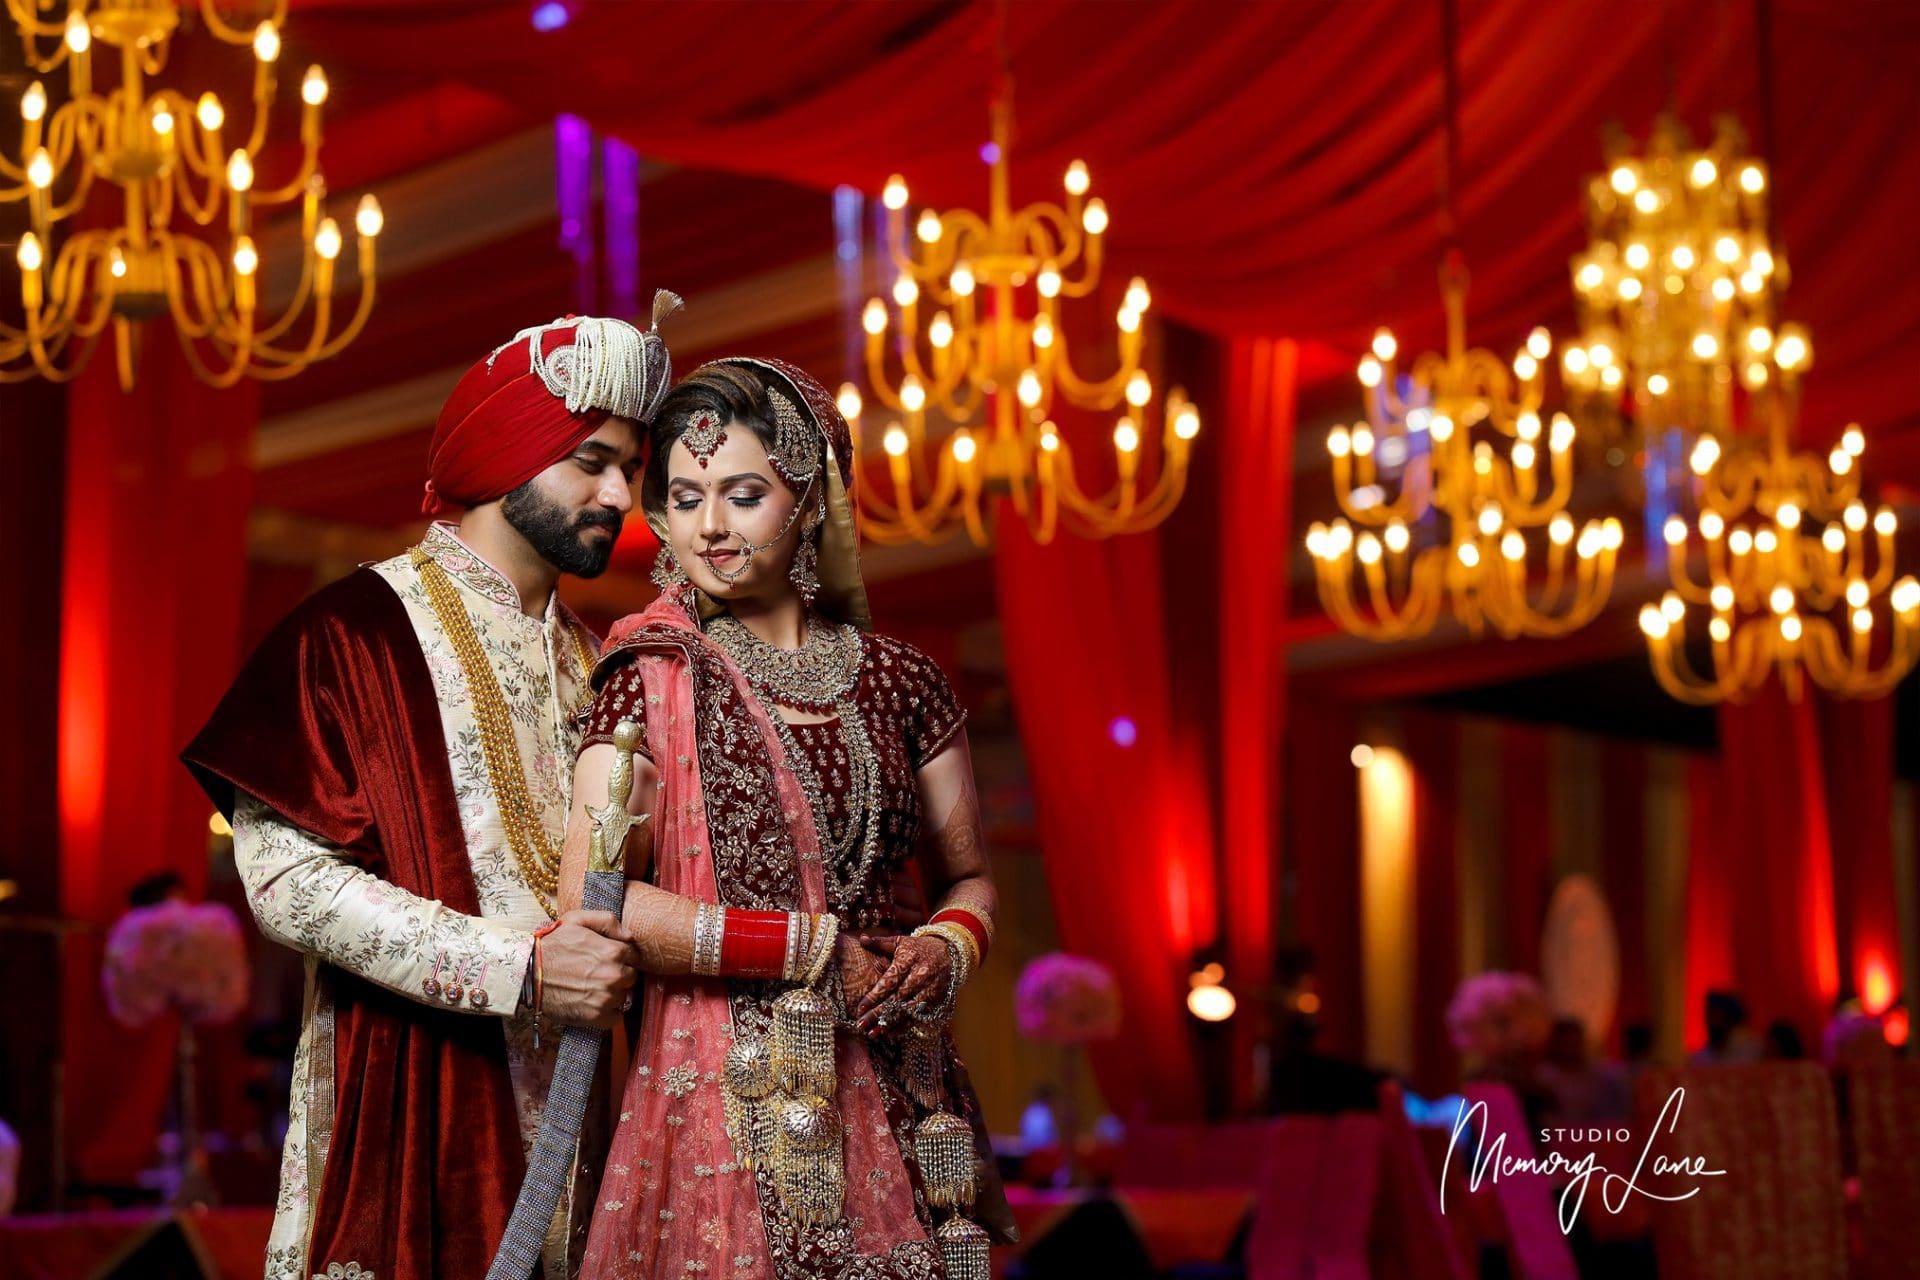 Photography At Its Best Ethnic Punjabi Wedding Couple Photography Studio Memory Lane That's why we wish our dear ones to have a happy married life. ethnic punjabi wedding couple